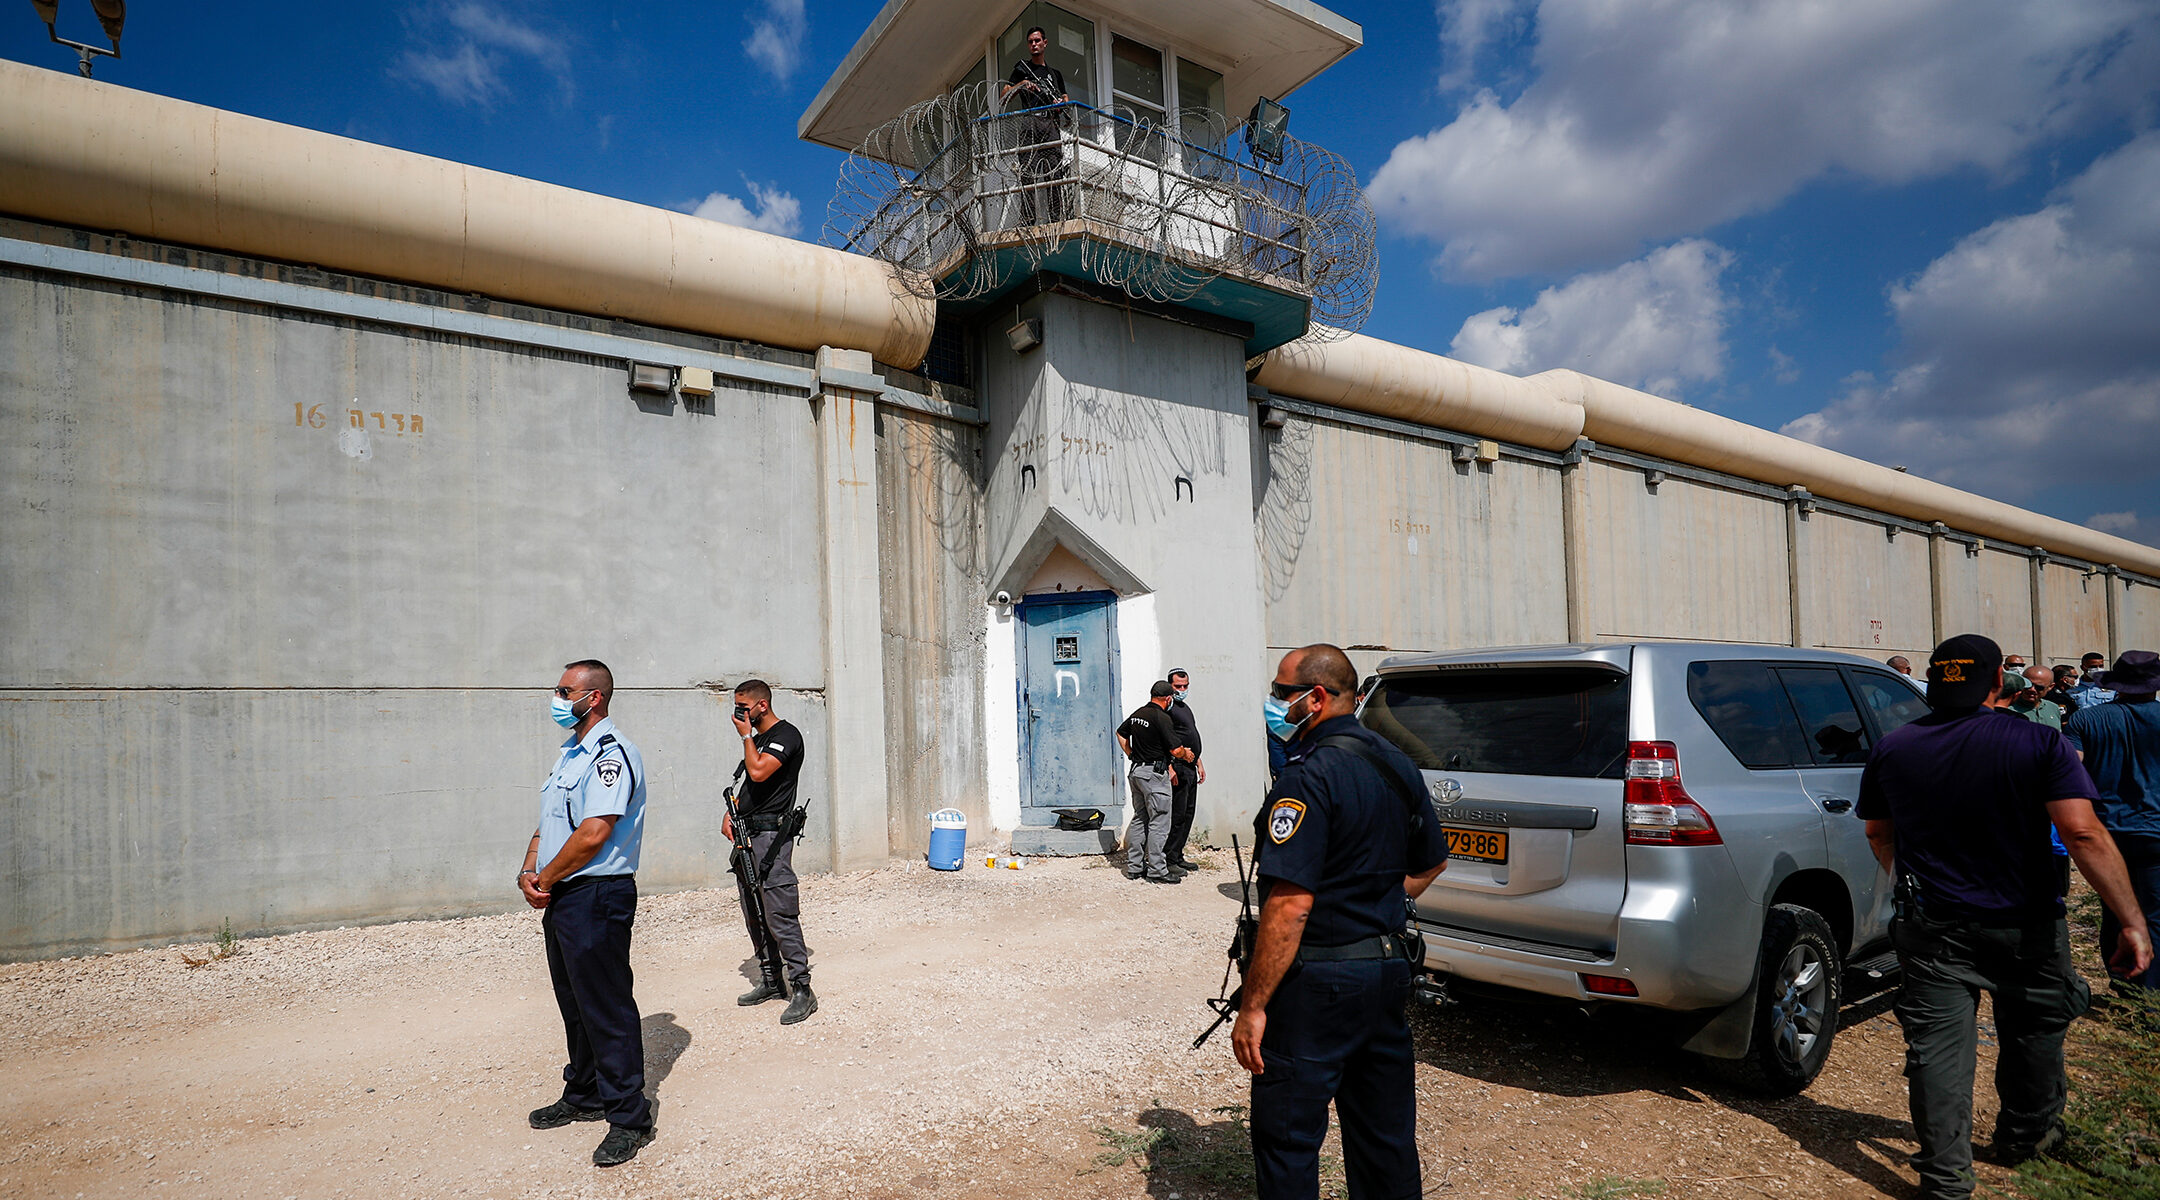 Police officers and prison guards inspect the scene of a prison escape of six Palestinian prisoners, outside the Gilboa prison in northern Israel on Sept. 6, 2021. (Flash90)